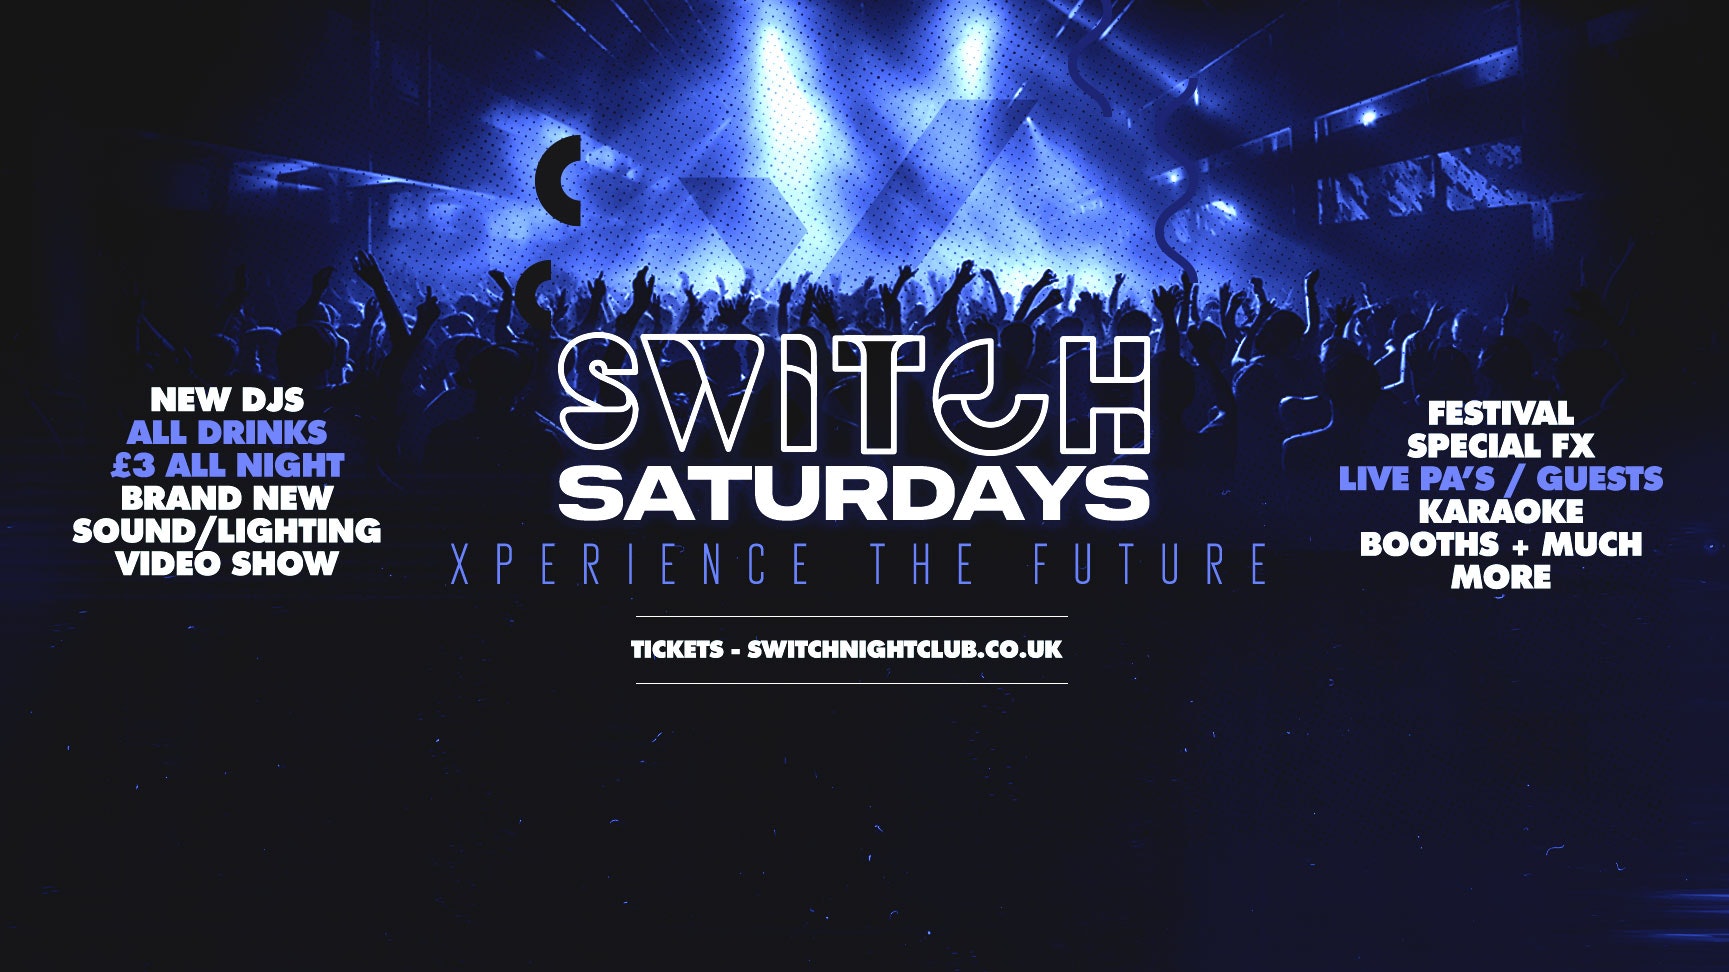 BRAND NEW!!!! SWITCH Saturdays | Xperience The Future | ALL DRINKS £3 ALL NIGHT